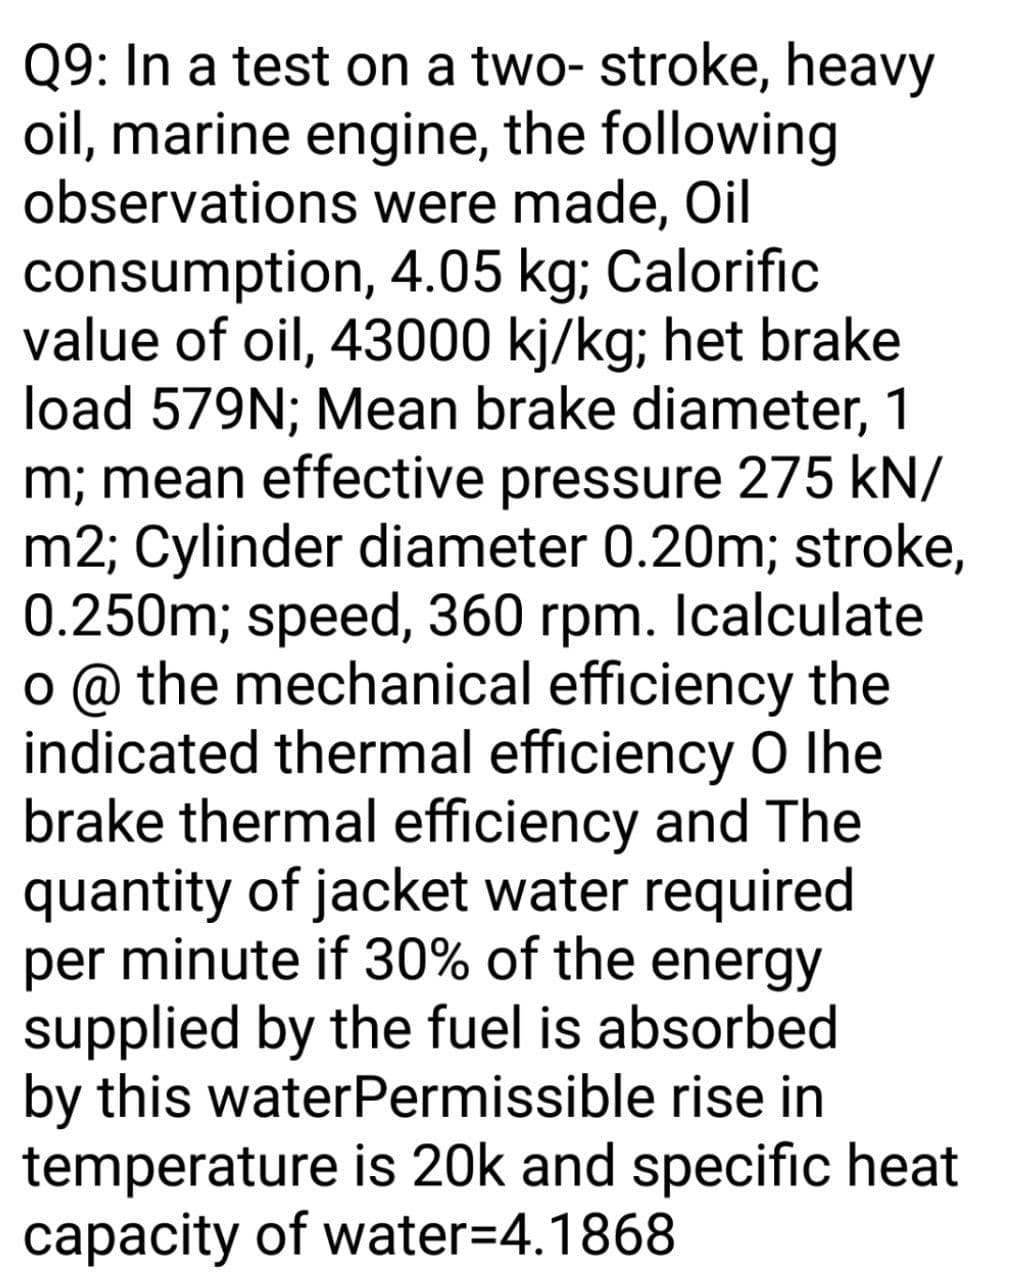 Q9: In a test on a two- stroke, heavy
oil, marine engine, the following
observations were made, Oil
consumption, 4.05 kg; Calorific
value of oil, 43000 kj/kg; het brake
load 579N; Mean brake diameter, 1
m; mean effective pressure 275 kN/
m2; Cylinder diameter 0.20m; stroke,
0.250m; speed, 360 rpm. Icalculate
o @ the mechanical efficiency the
indicated thermal efficiency O Ihe
brake thermal efficiency and The
quantity of jacket water required
per minute if 30% of the energy
supplied by the fuel is absorbed
by this waterPermissible rise in
temperature is 20k and specific heat
capacity of water=4.1868
